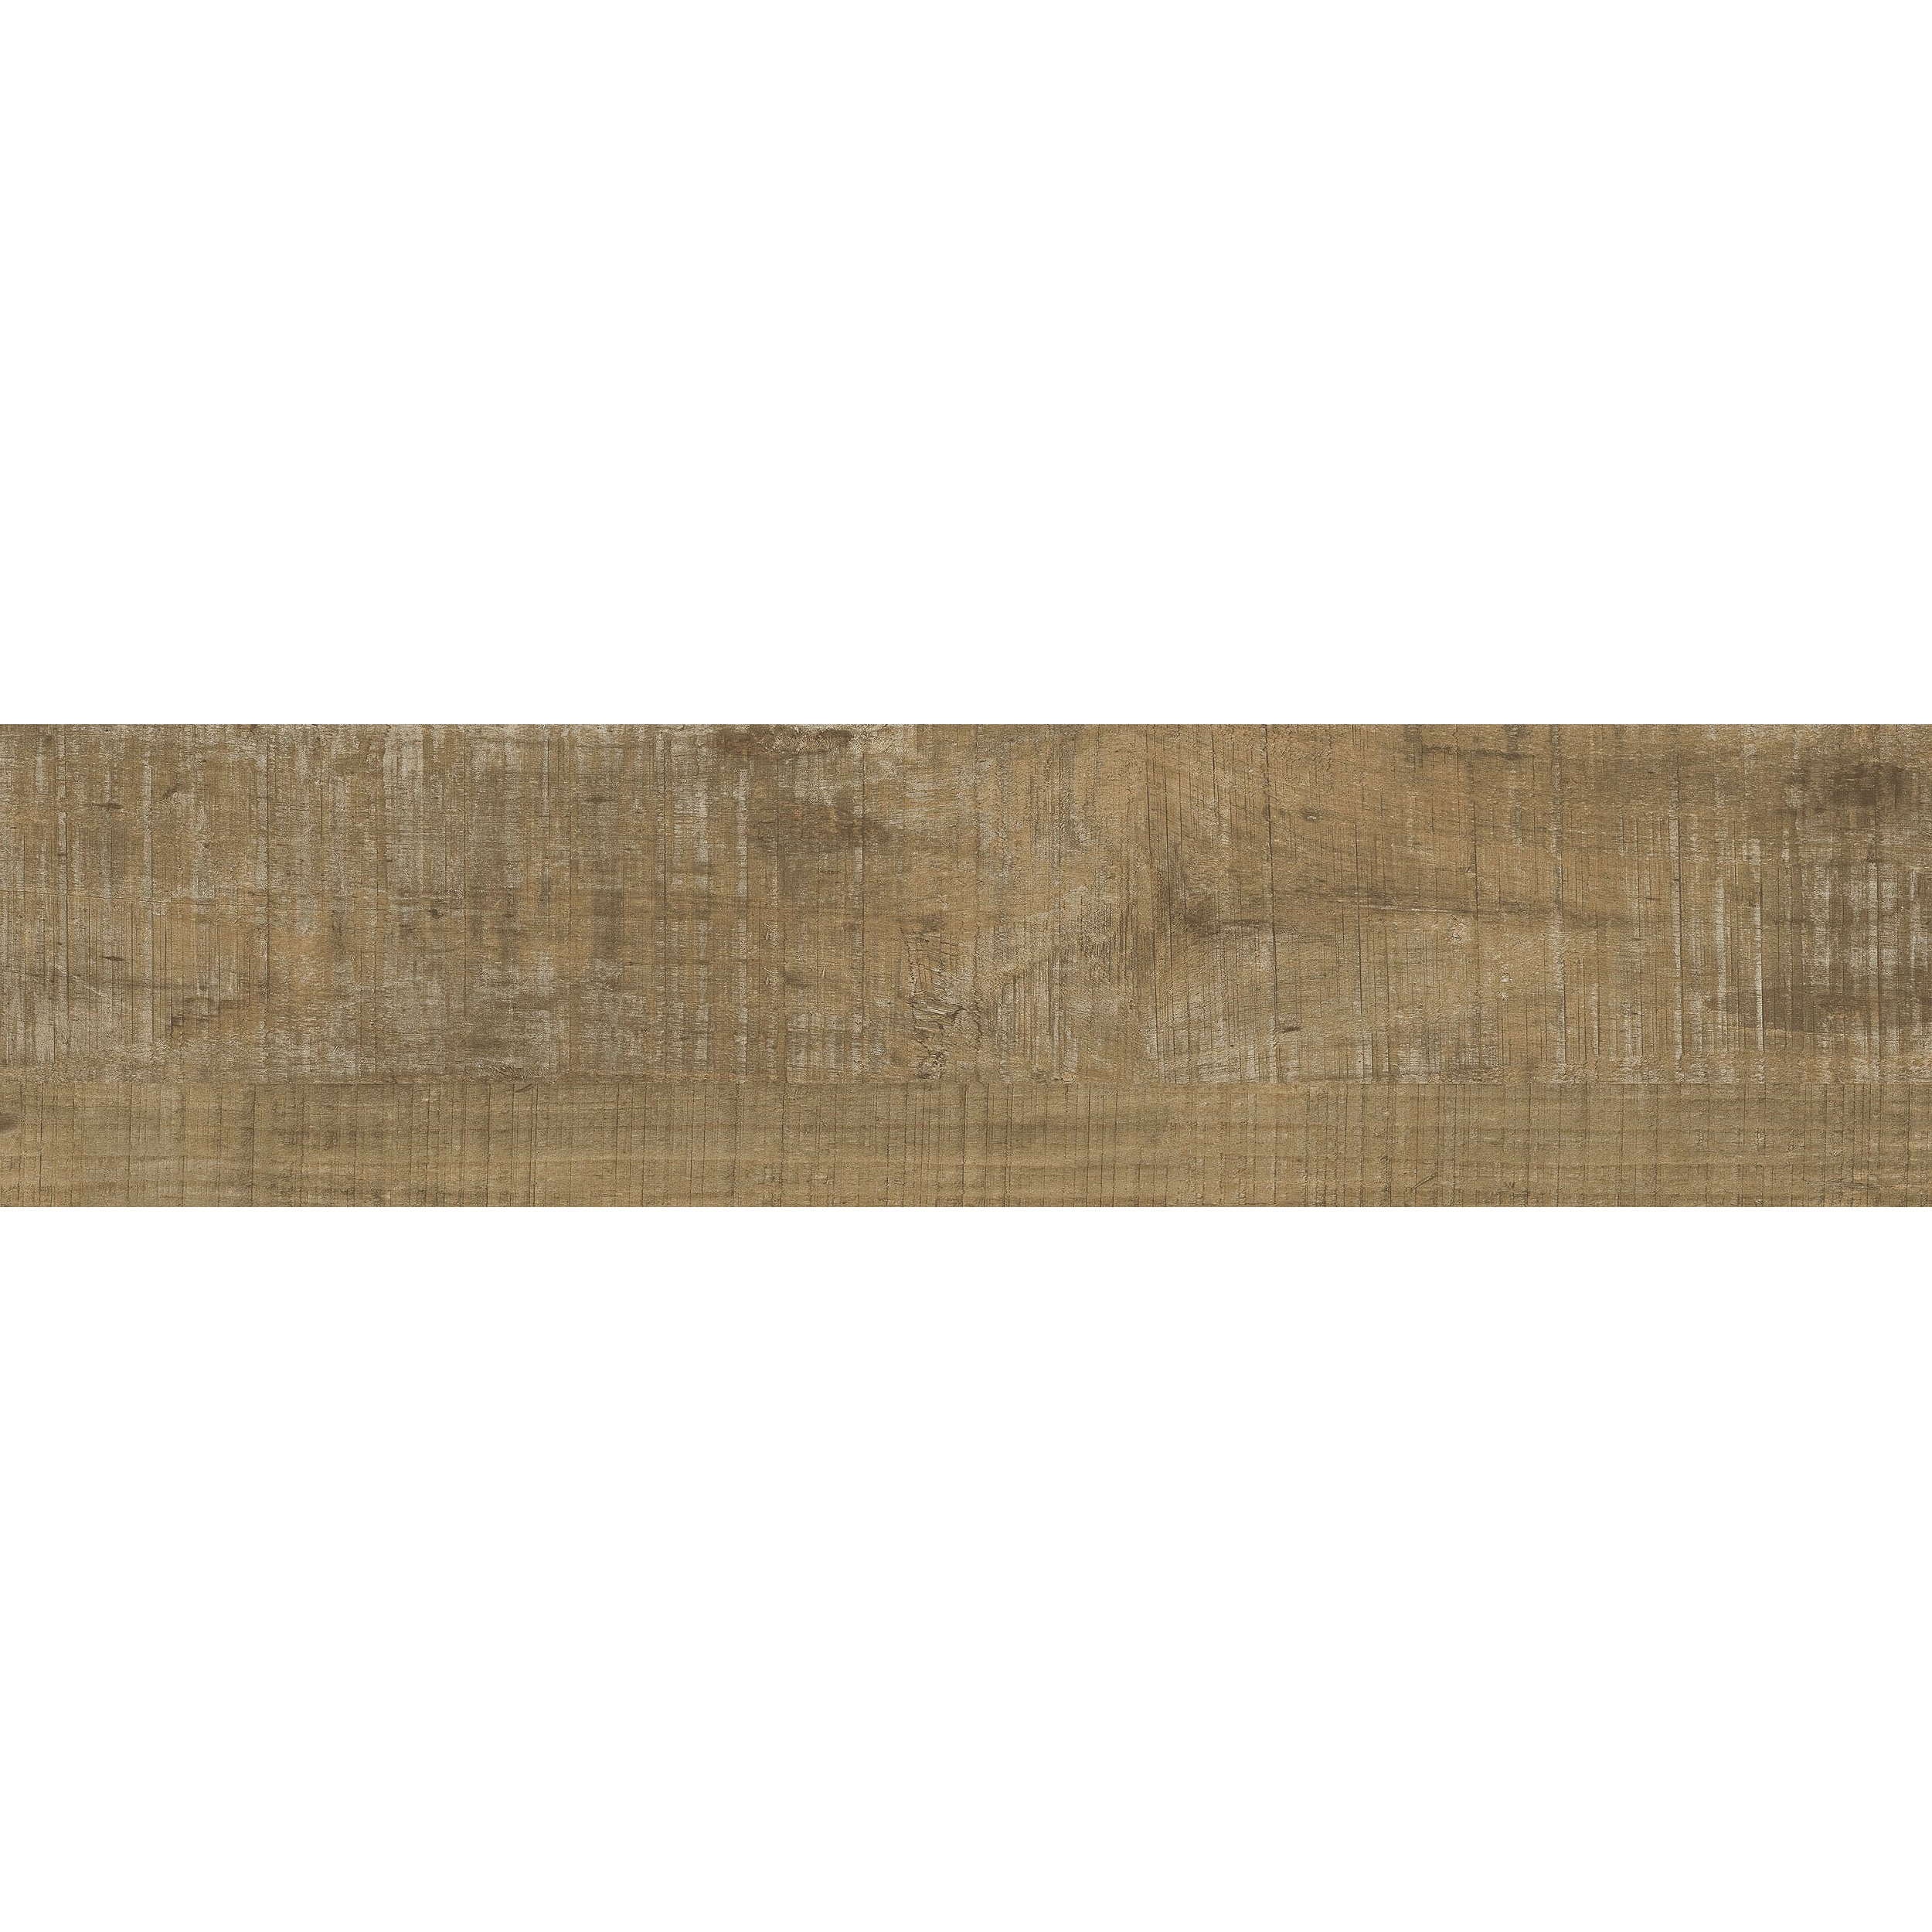 Textured Woodgrains LVT In Distressed Hickory image number 11